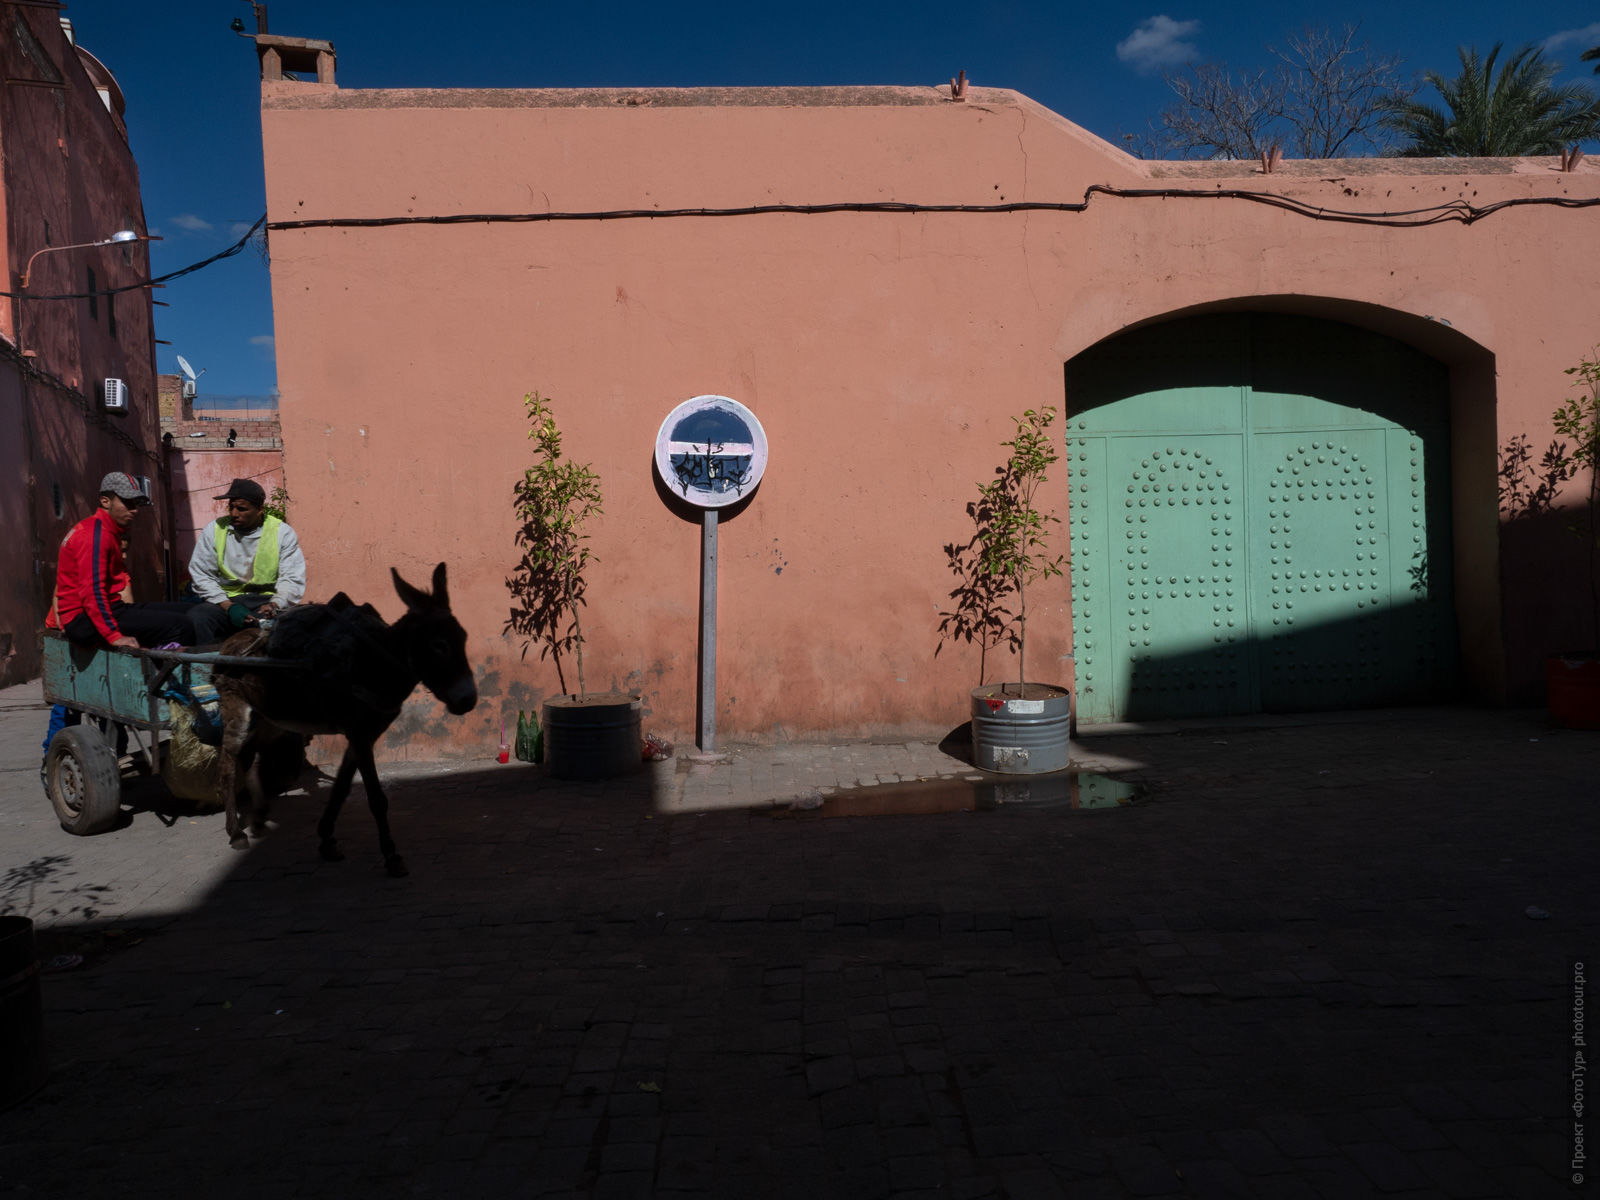 The streets of the medina of Marrakesh, Morocco. Adventure photo tour: medina, cascades, sands and ports of Morocco, April 4 - 17, 2020.